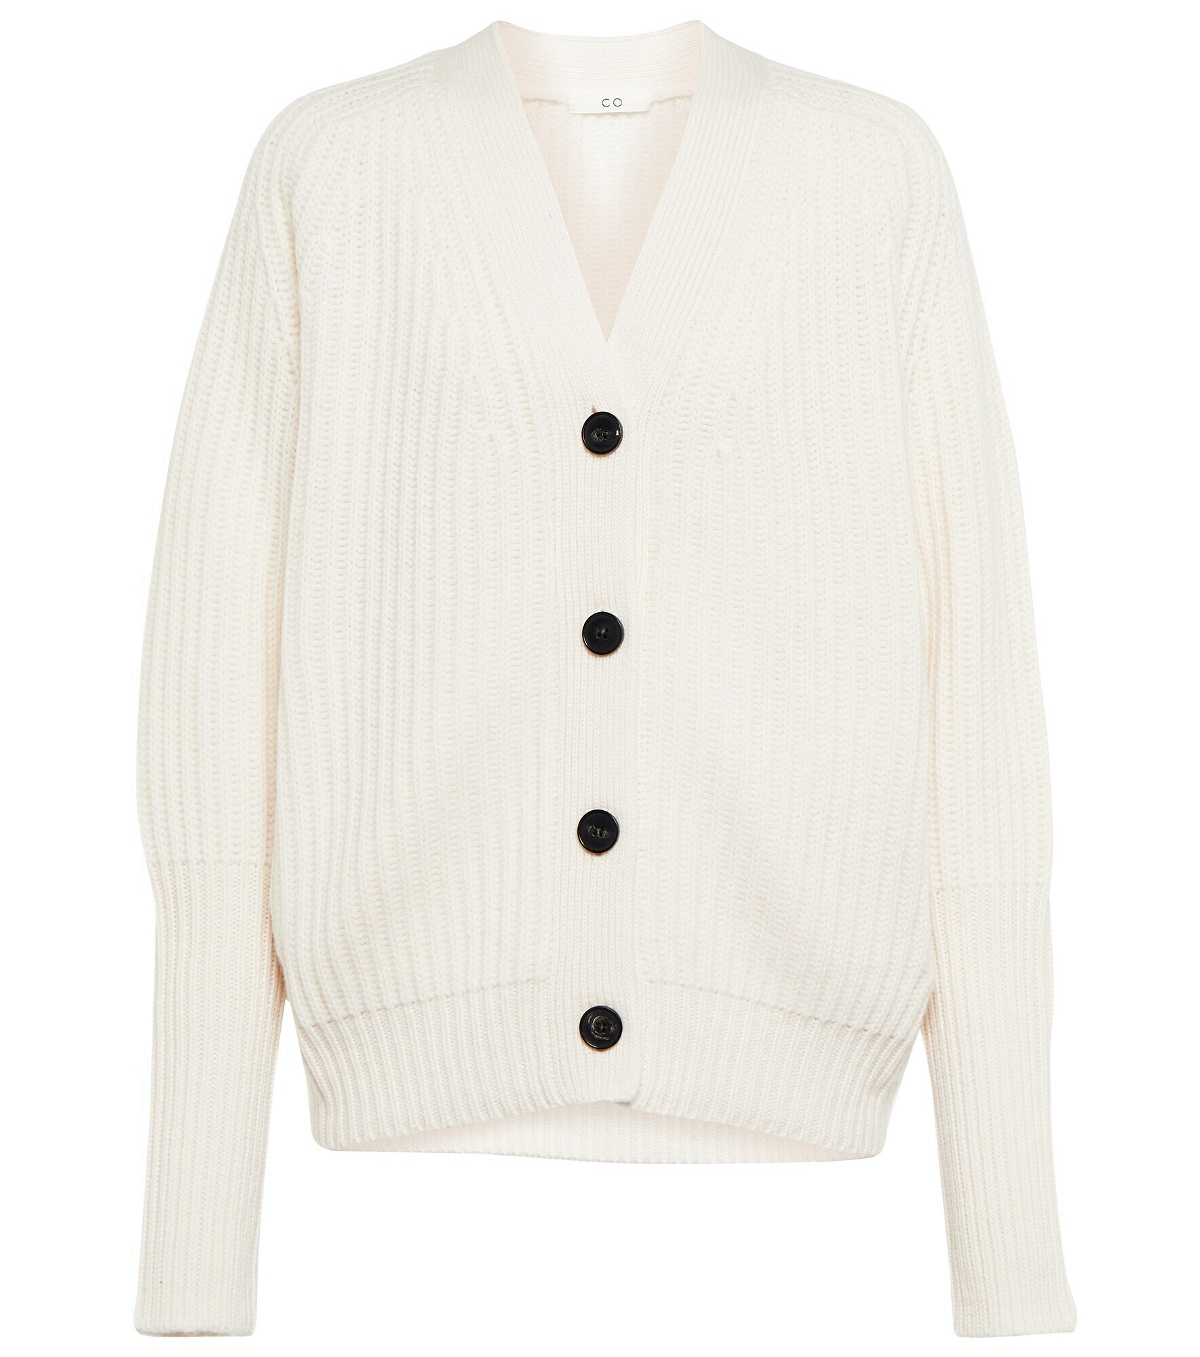 CO - Wool and cashmere cardigan Coach